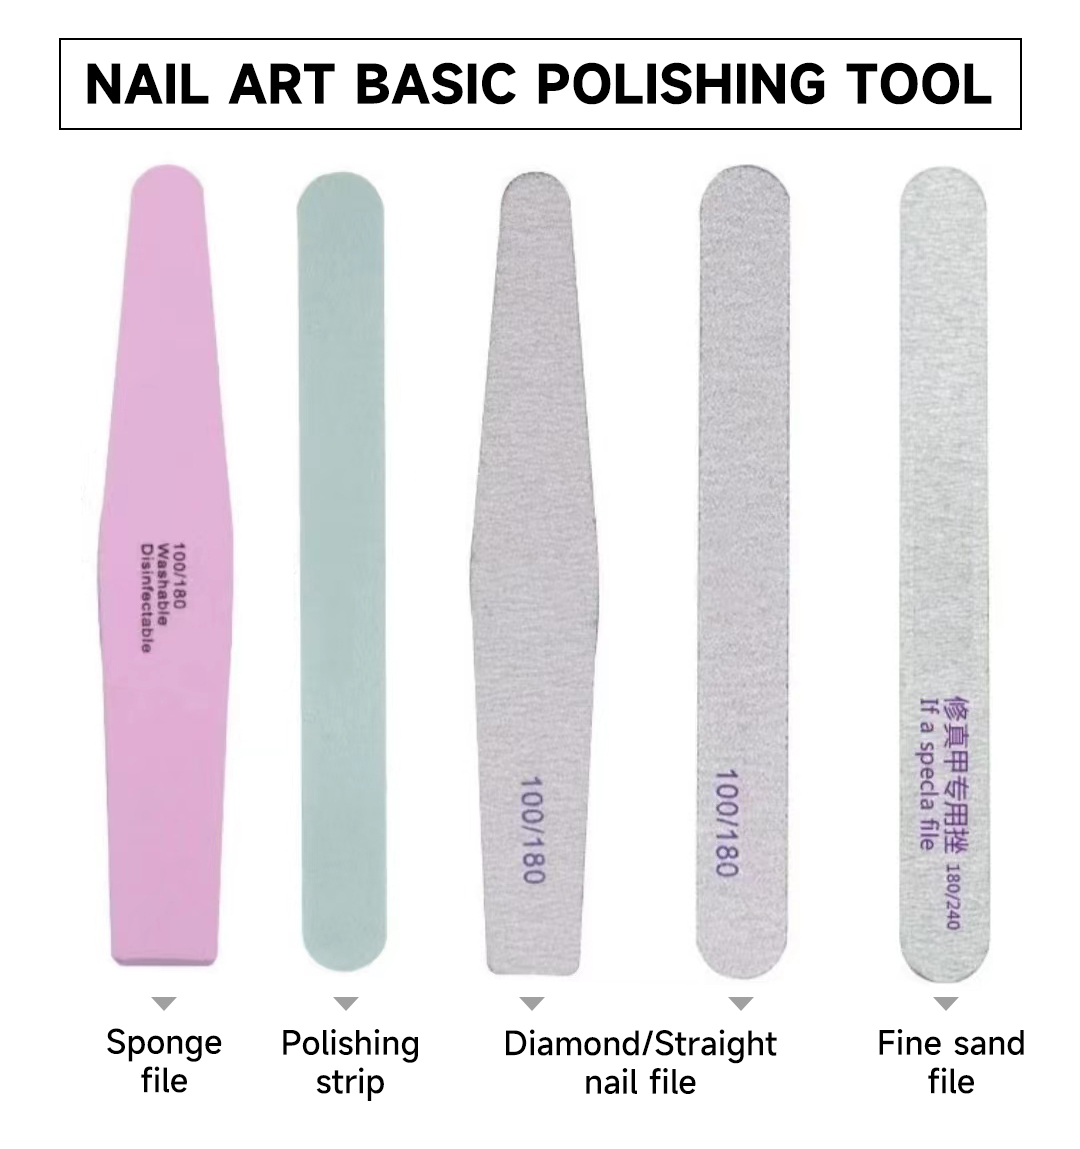 Nail Filing Techniques for Different Nail Shapes